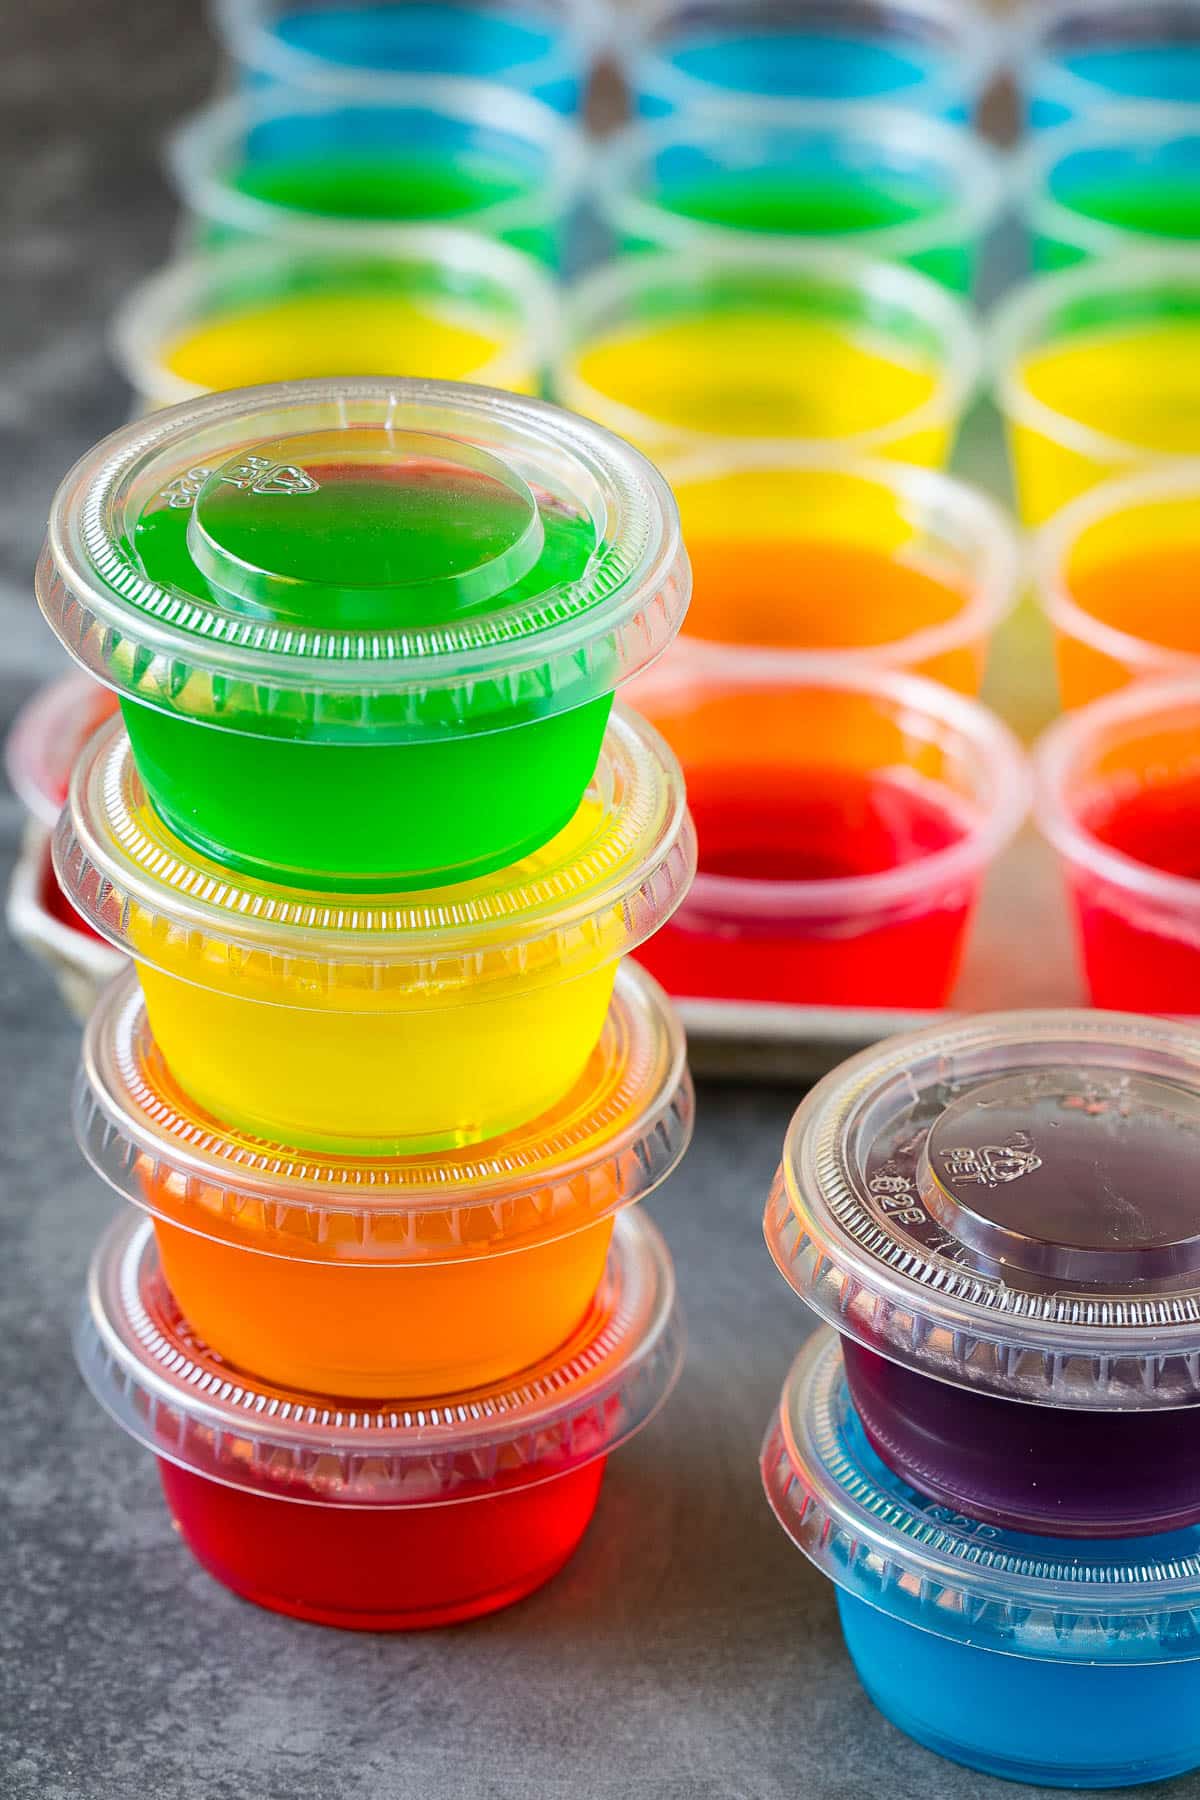 A stack of gelatin shots in plastic containers.